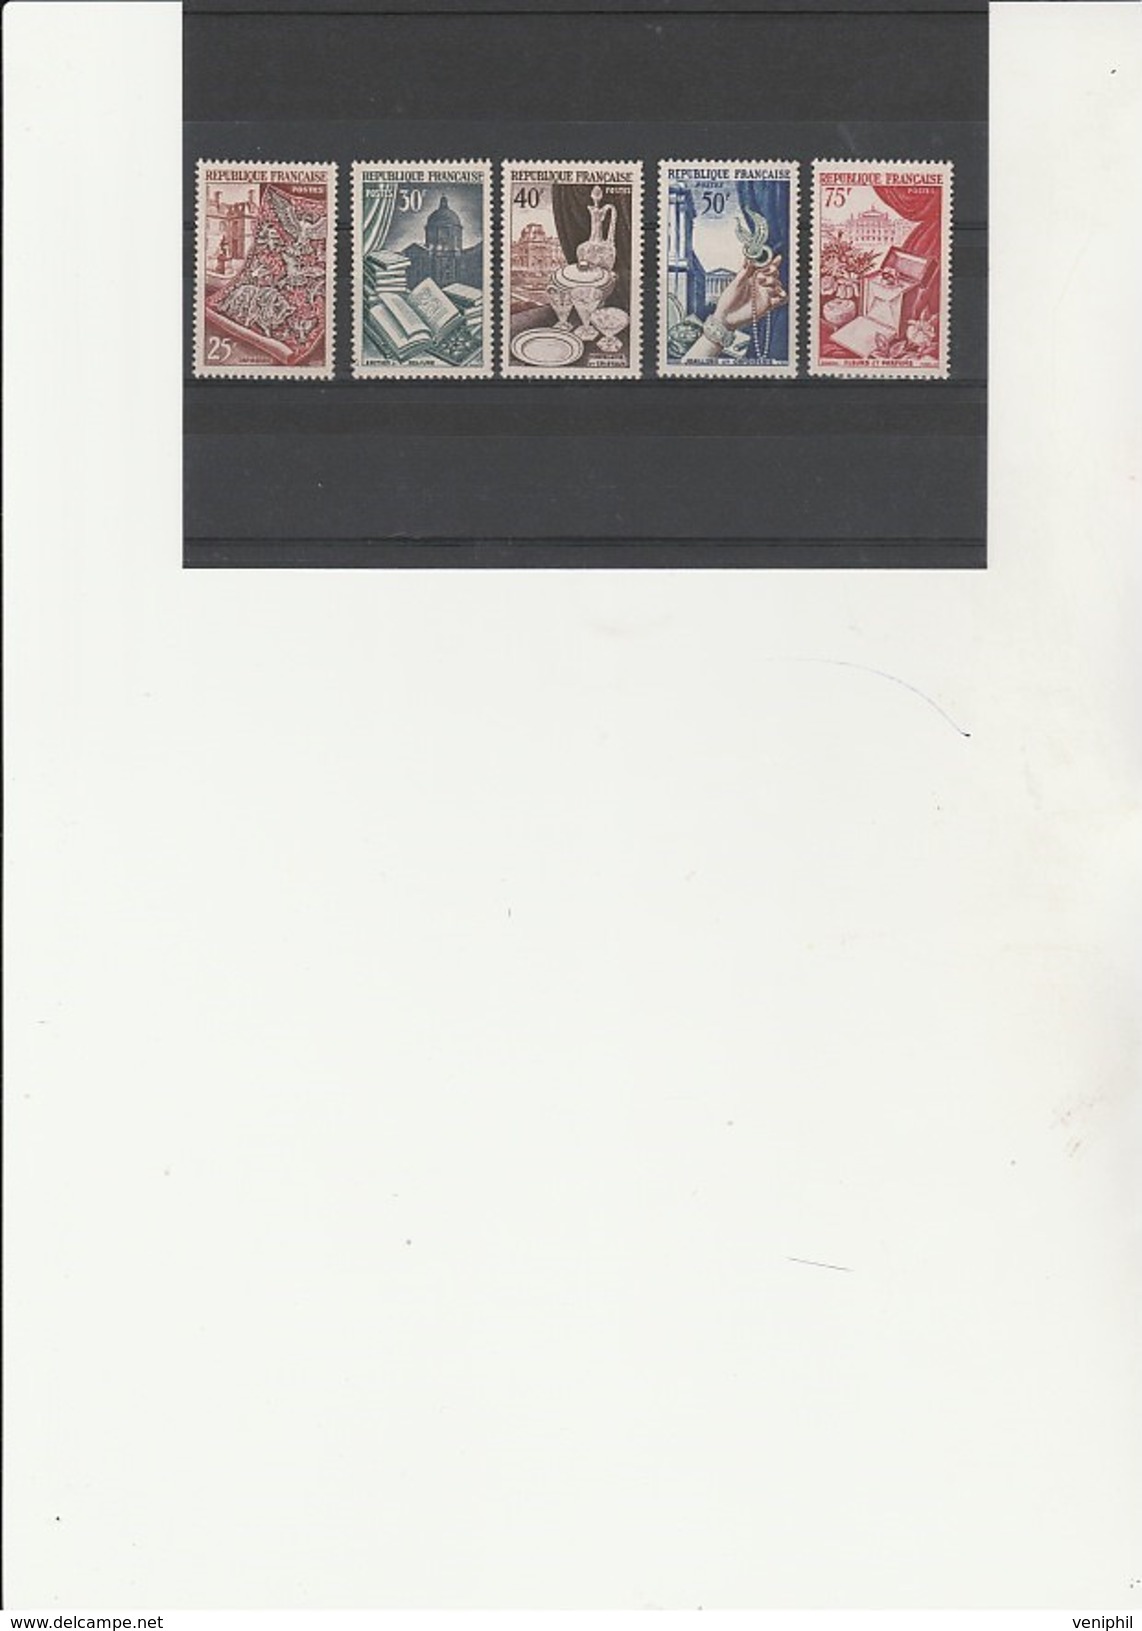 TIMBRES  METIERS D'ART - N° 970 A 974 NEUF XX SANS CHARNIERE -ANNEE 1954  - COTE : 45 € - Nuovi